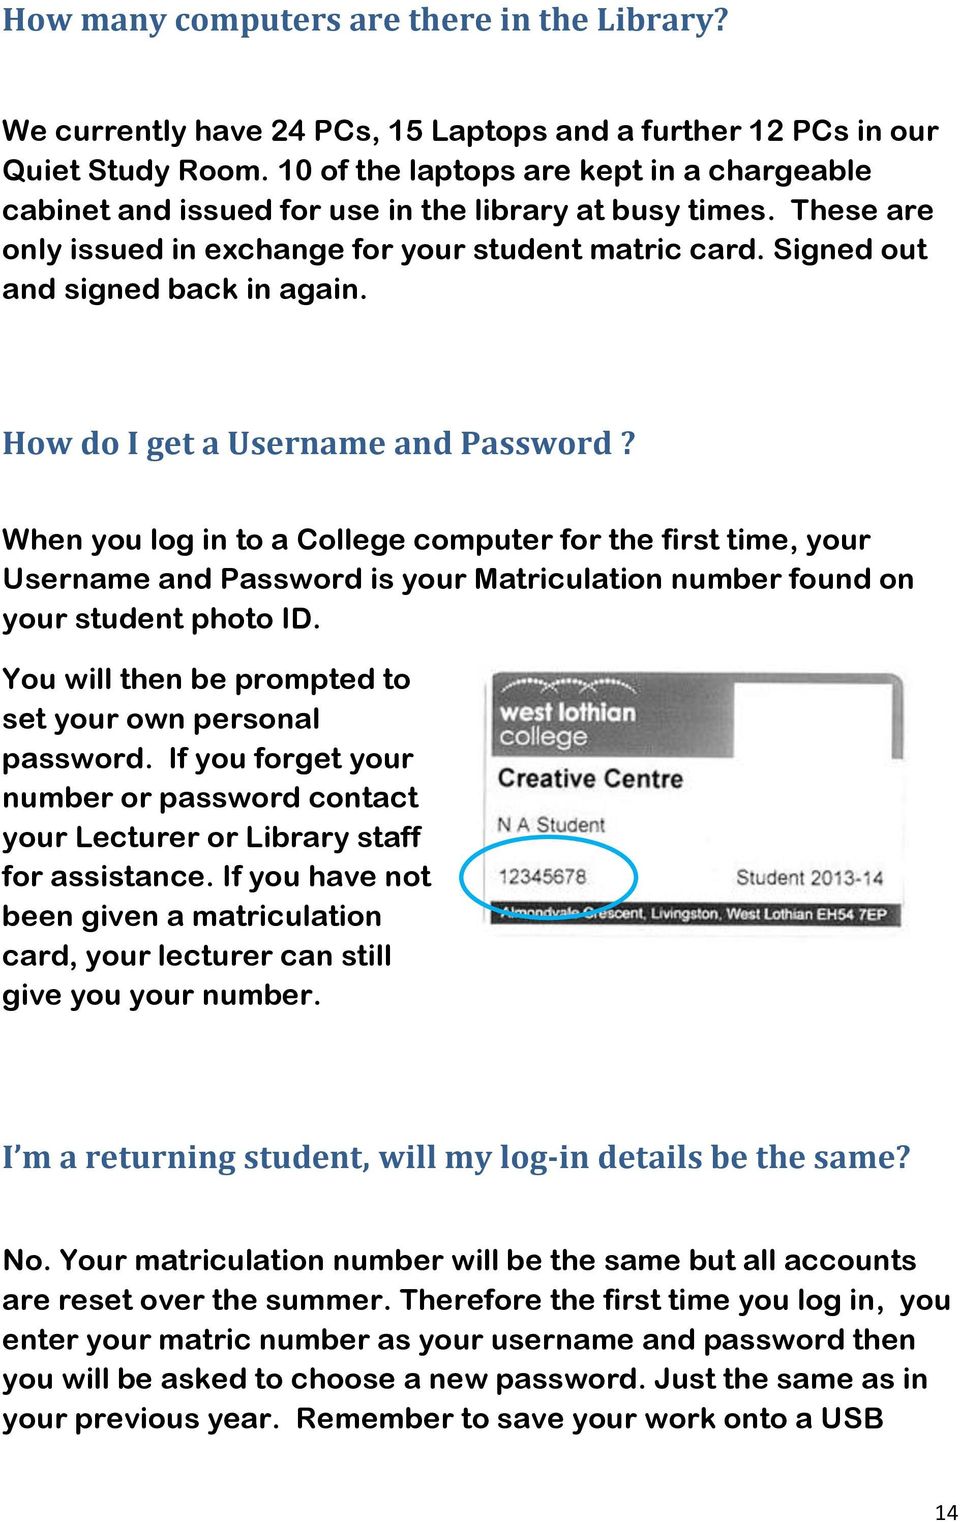 How do I get a Username and Password? When you log in to a College computer for the first time, your Username and Password is your Matriculation number found on your student photo ID.